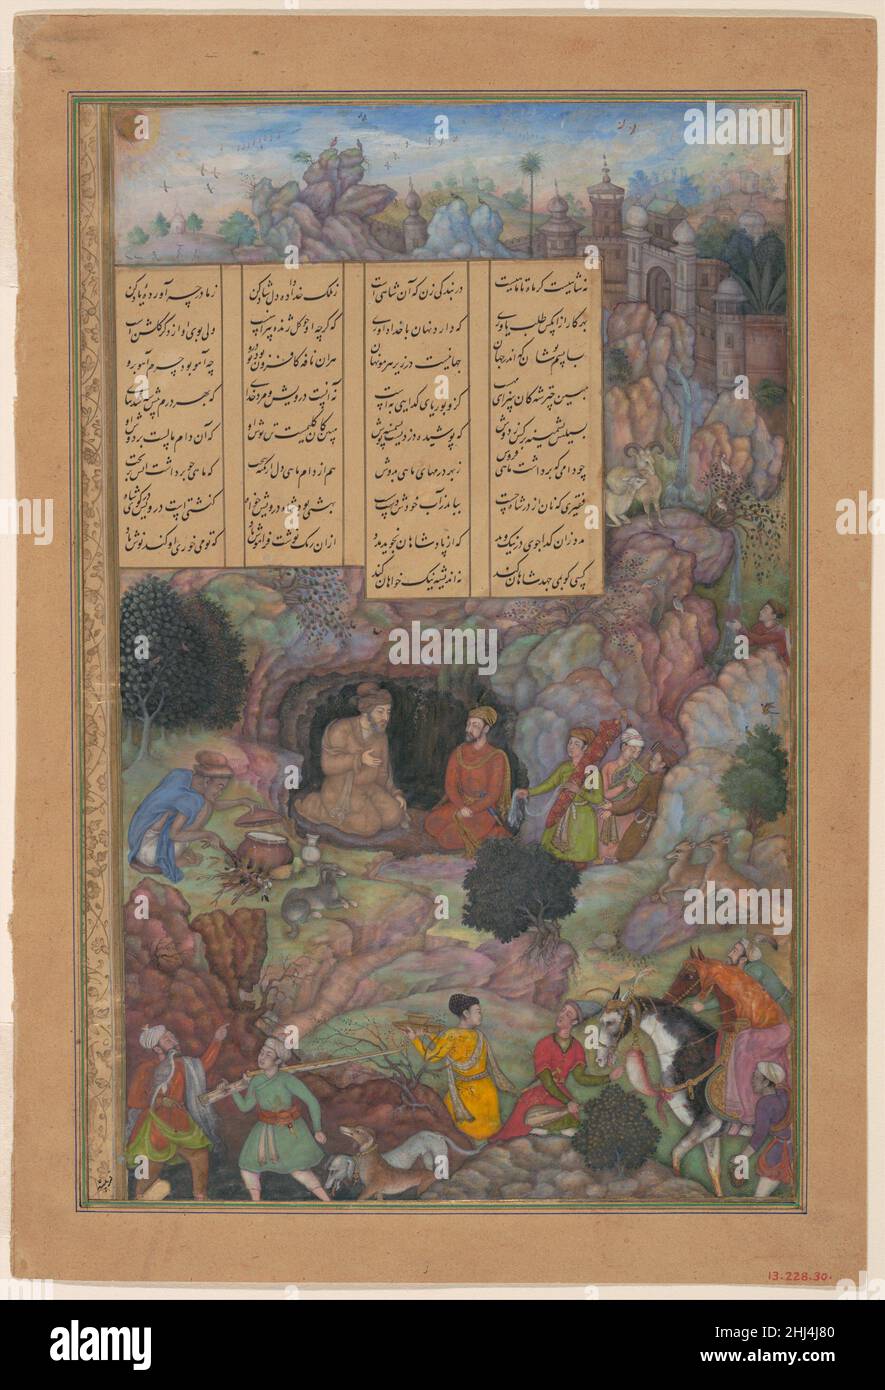 'Alexander Visits the Sage Plato in his Mountain Cave', Folio from a Khamsa (Quintet) of Amir Khusrau Dihlavi 1597–98 Amir Khusrau Dihlavi The Khamsa of the Indian poet Amir Khusrau includes a section on the philosopher-king Alexander the Great, who in Khusrau’s telling of his life led expeditions to China, Russia, and the Western Isles, and also undertook quests of a spiritual dimension. Here, the turbaned king is seated on the right, listening to the sage Plato, who offers advice on rulership but also warns of Alexander’s impending death.. 'Alexander Visits the Sage Plato in his Mountain Cav Stock Photo